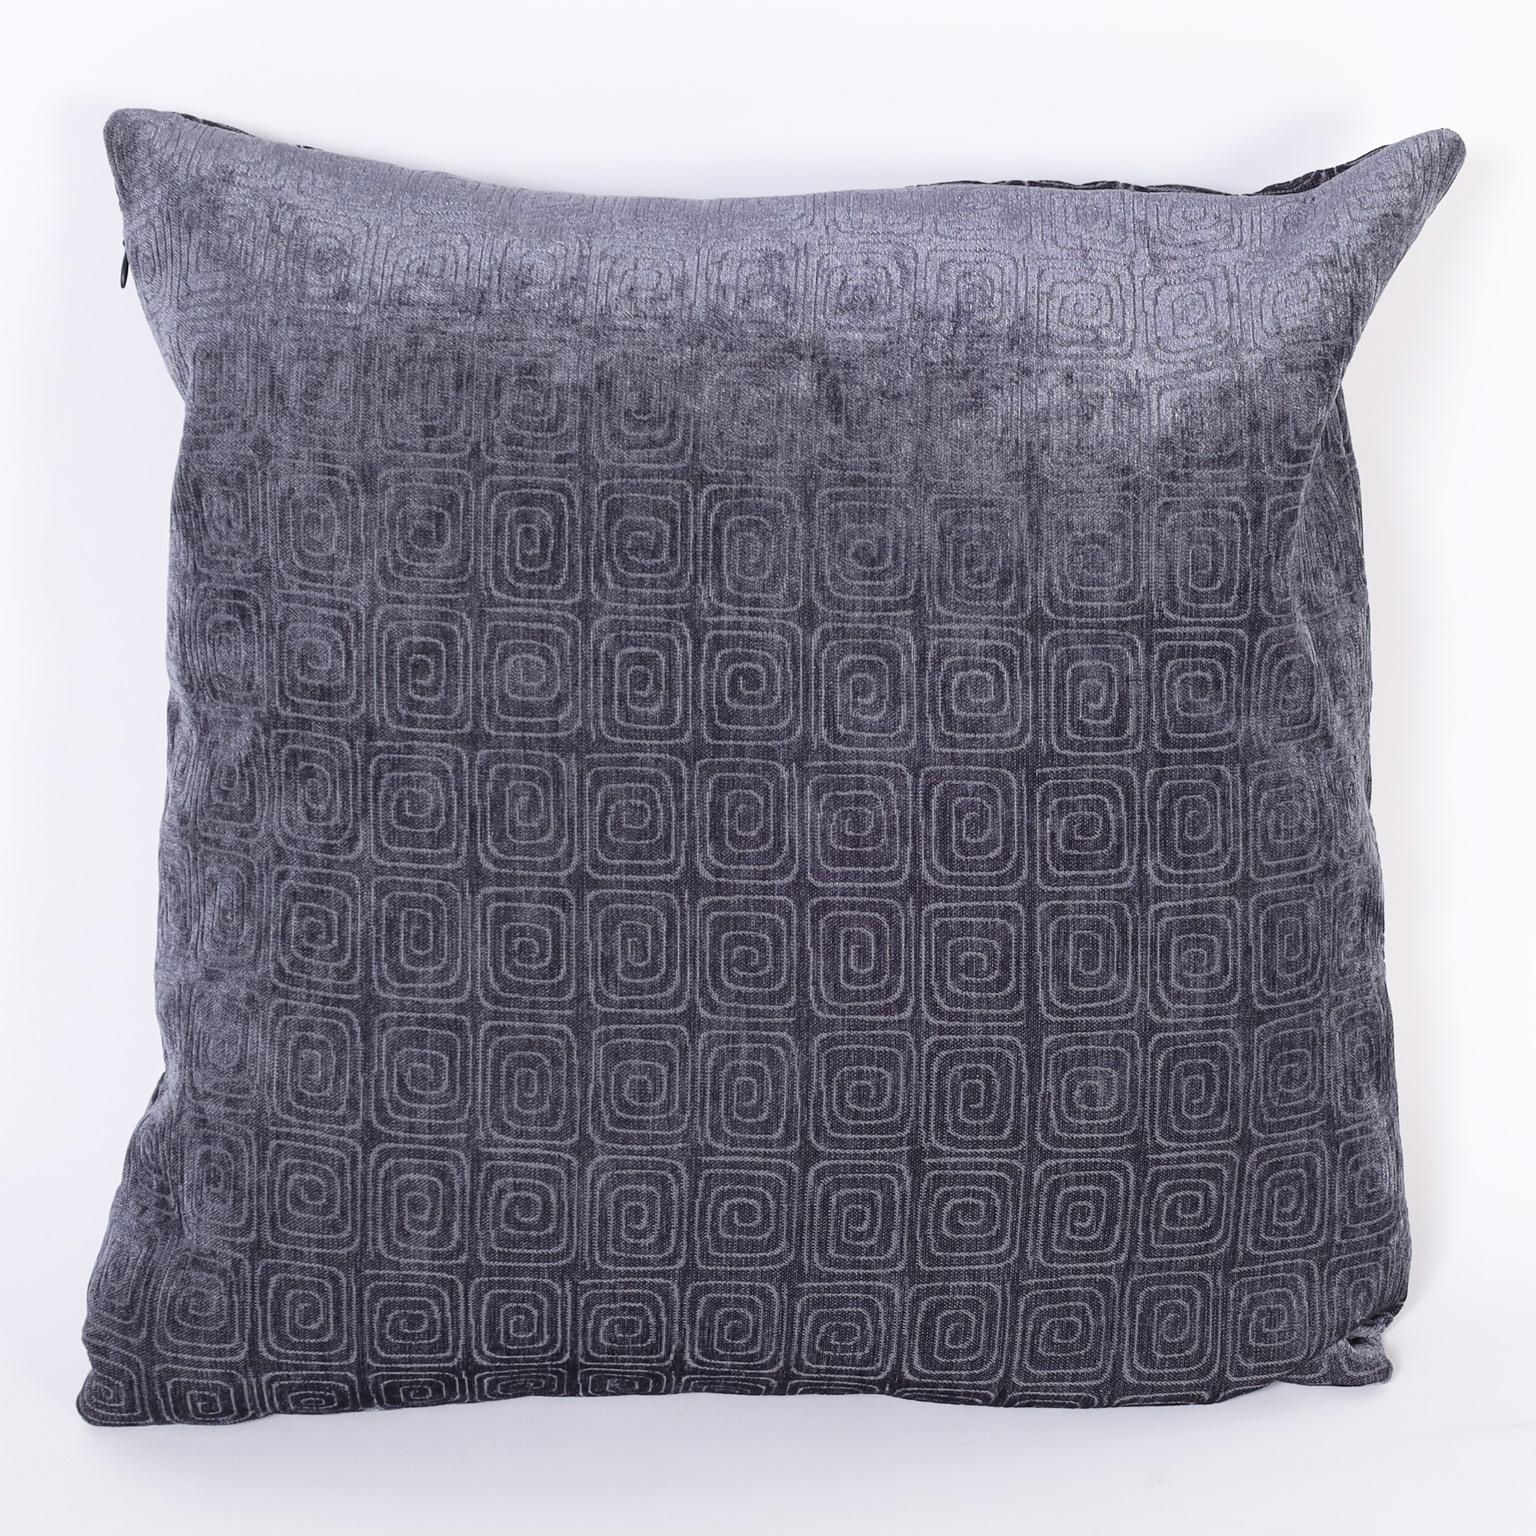 Pair of pillows crafted in velvetine relief with a repeating modern design.